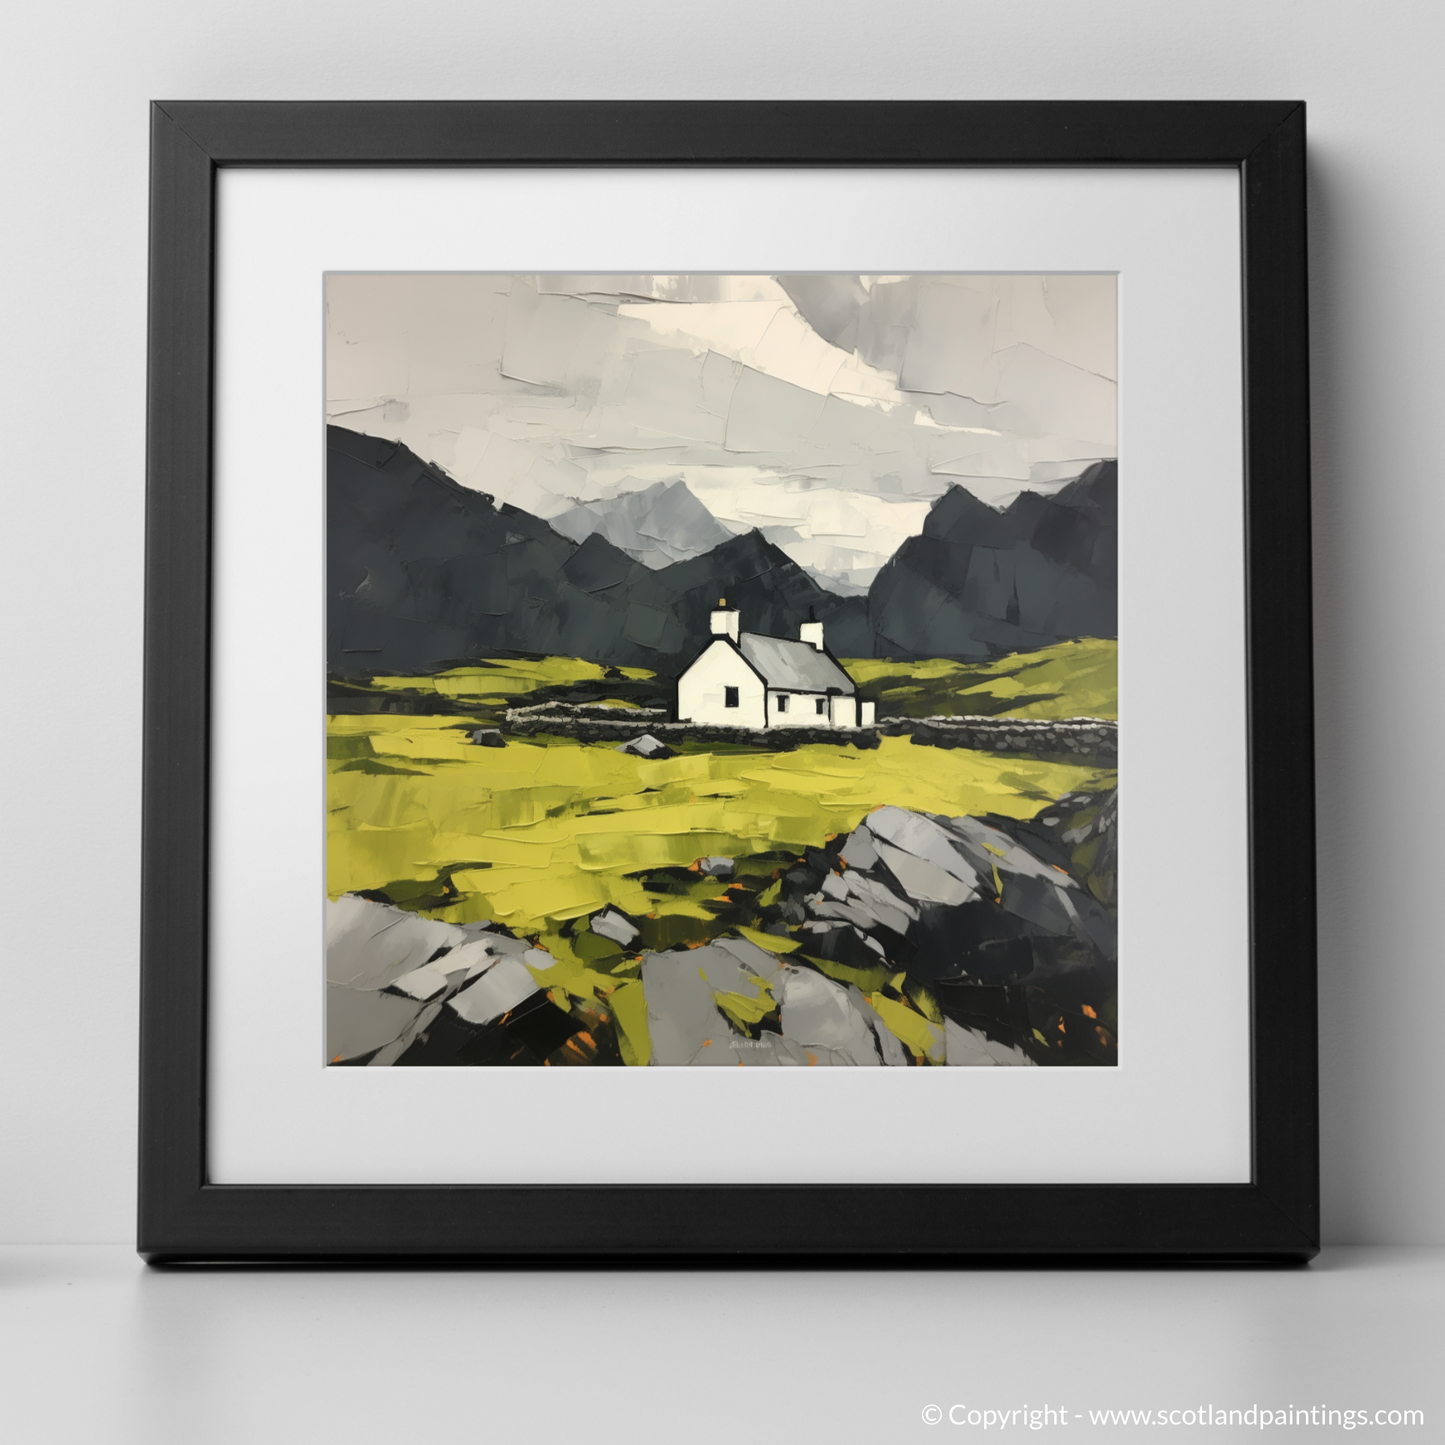 Painting and Art Print of Ben Vane. Majestic Wilderness: An Expressionist Ode to Ben Vane.